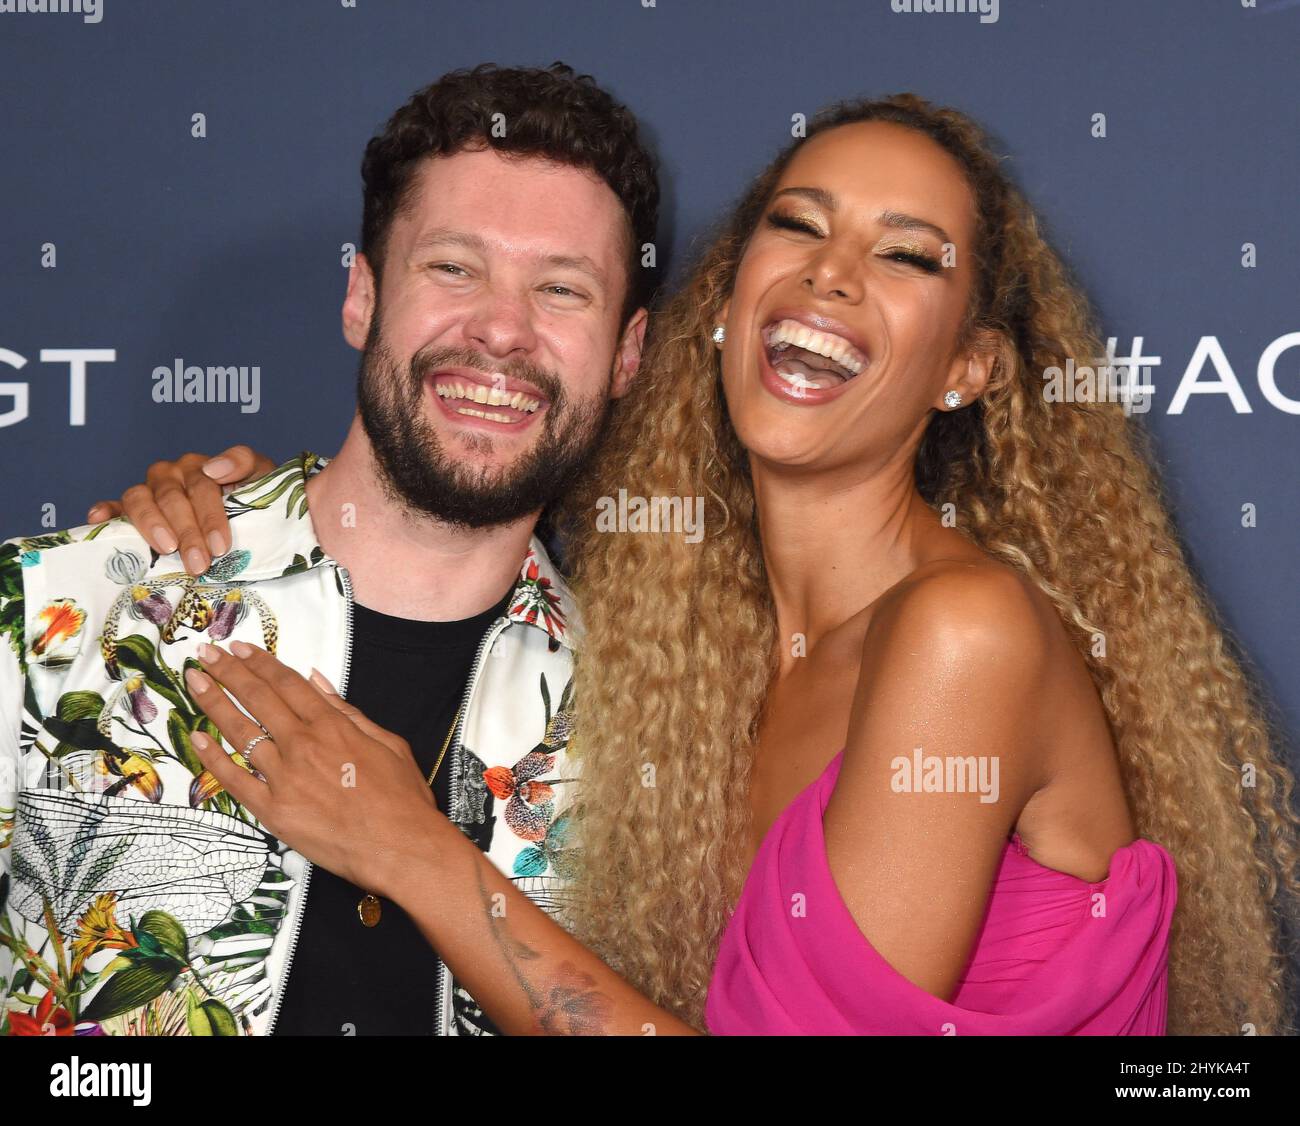 Calum Scott And Leona Lewis At Americas Got Talent Season 14 Live Show Finale Held At The Dolby 